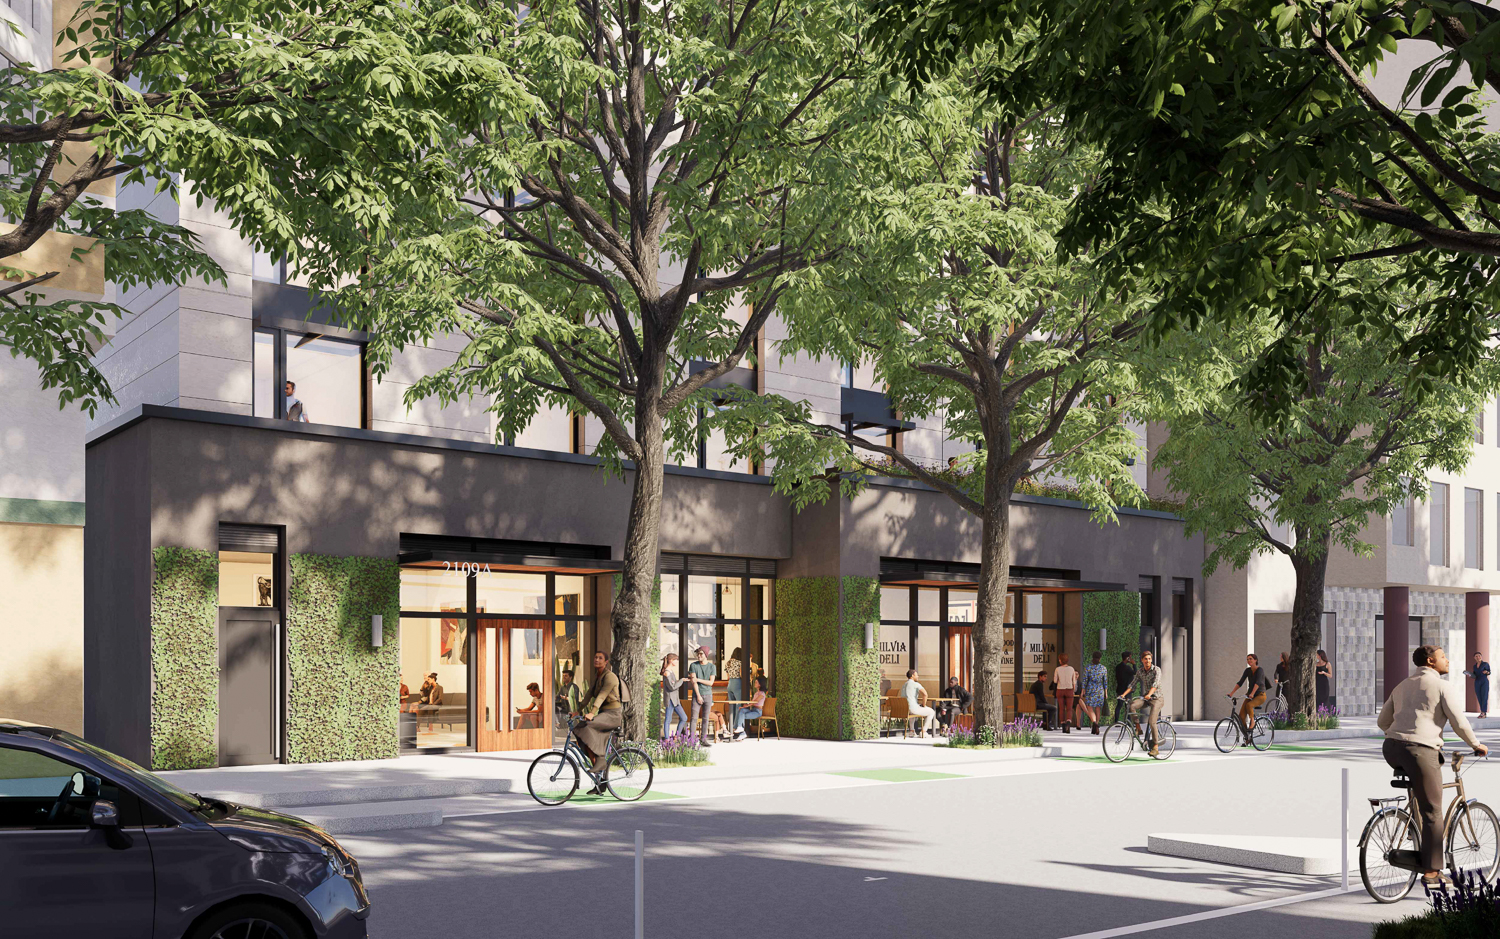 2109 Milvia Street streetscape, rendering by Trachtenberg Architects